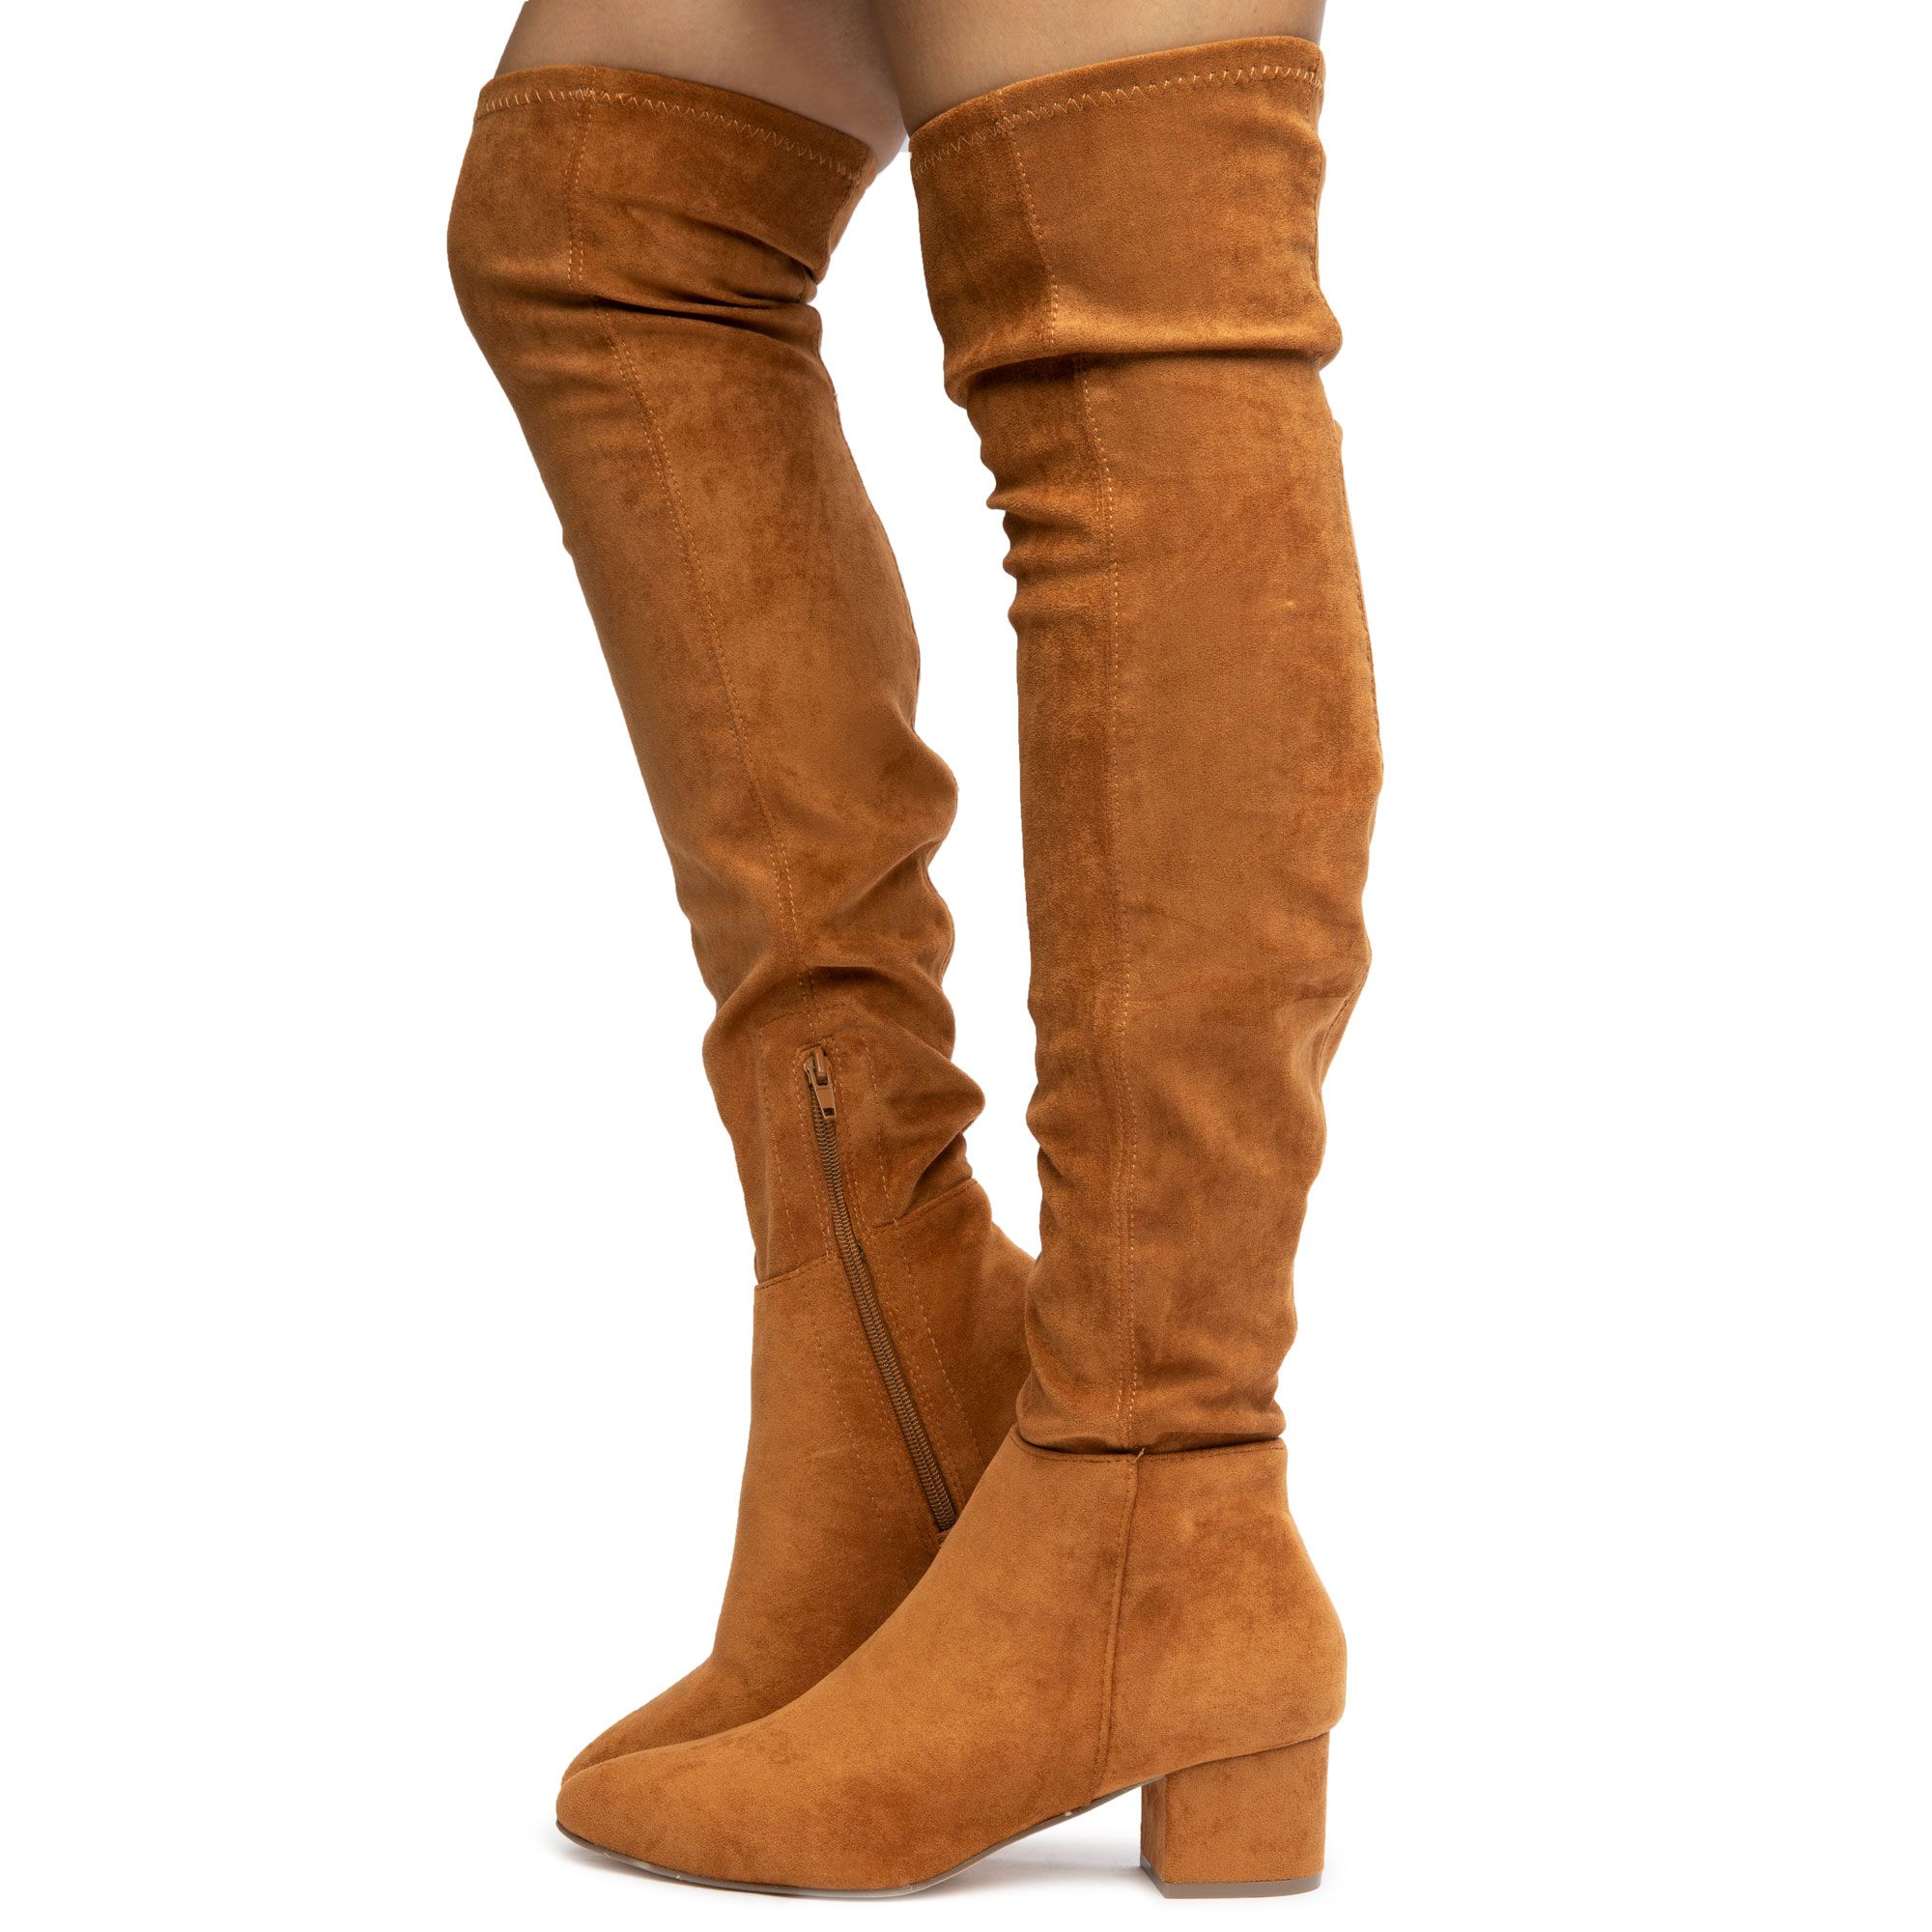 Wynter-1 Over the Knee Boots